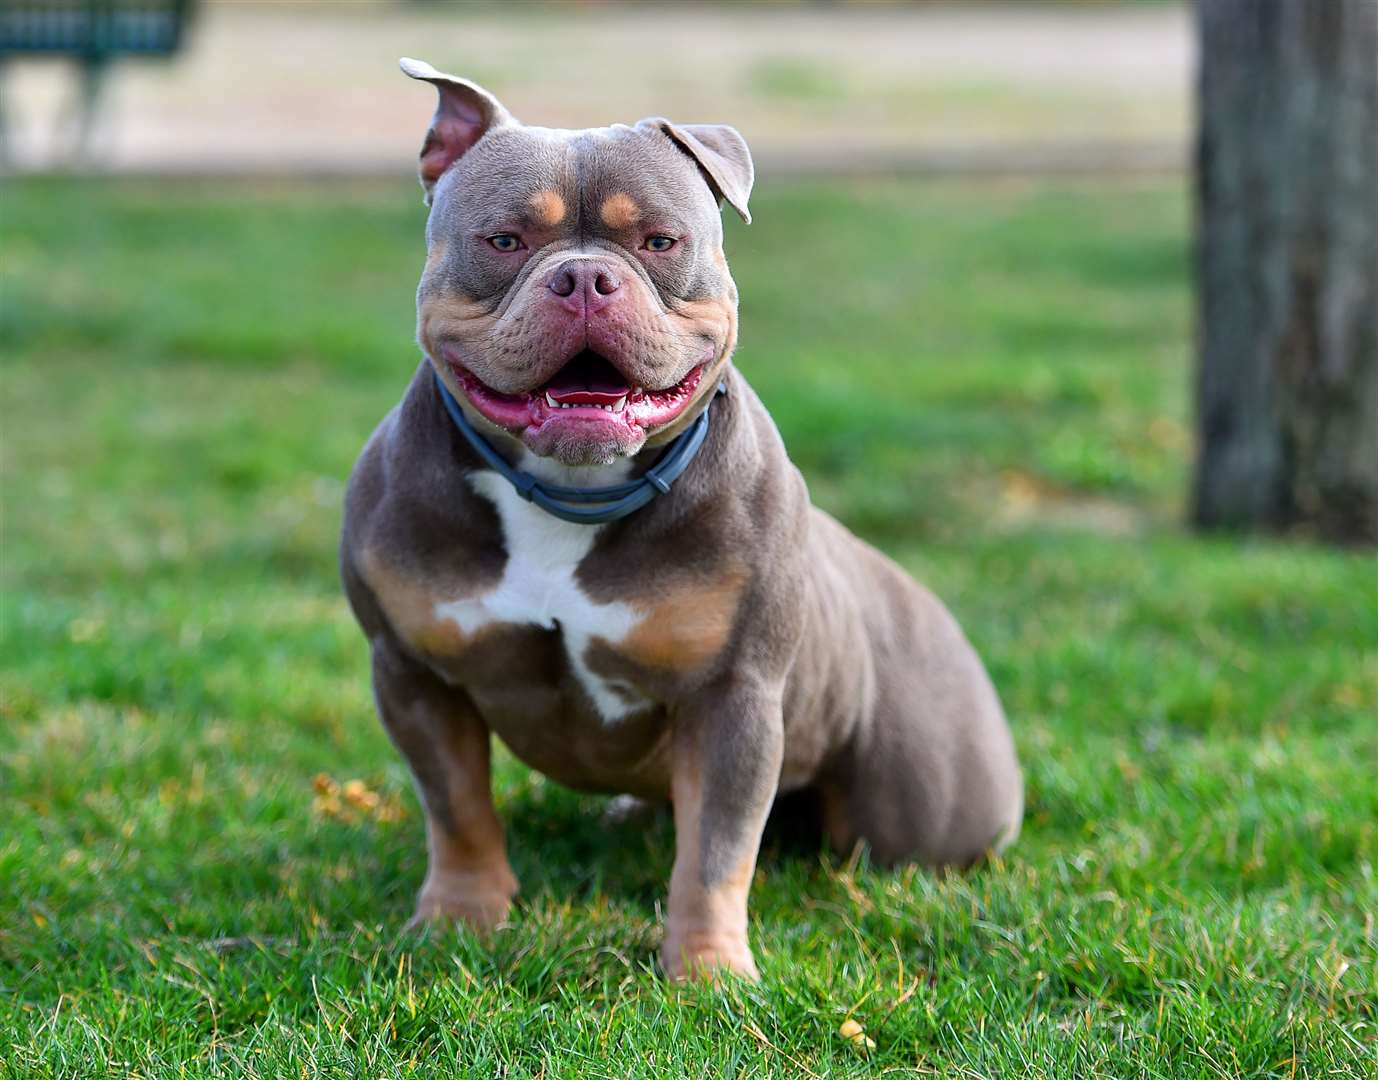 The XL Bully breed is to be banned from December 31. Image: iStock.